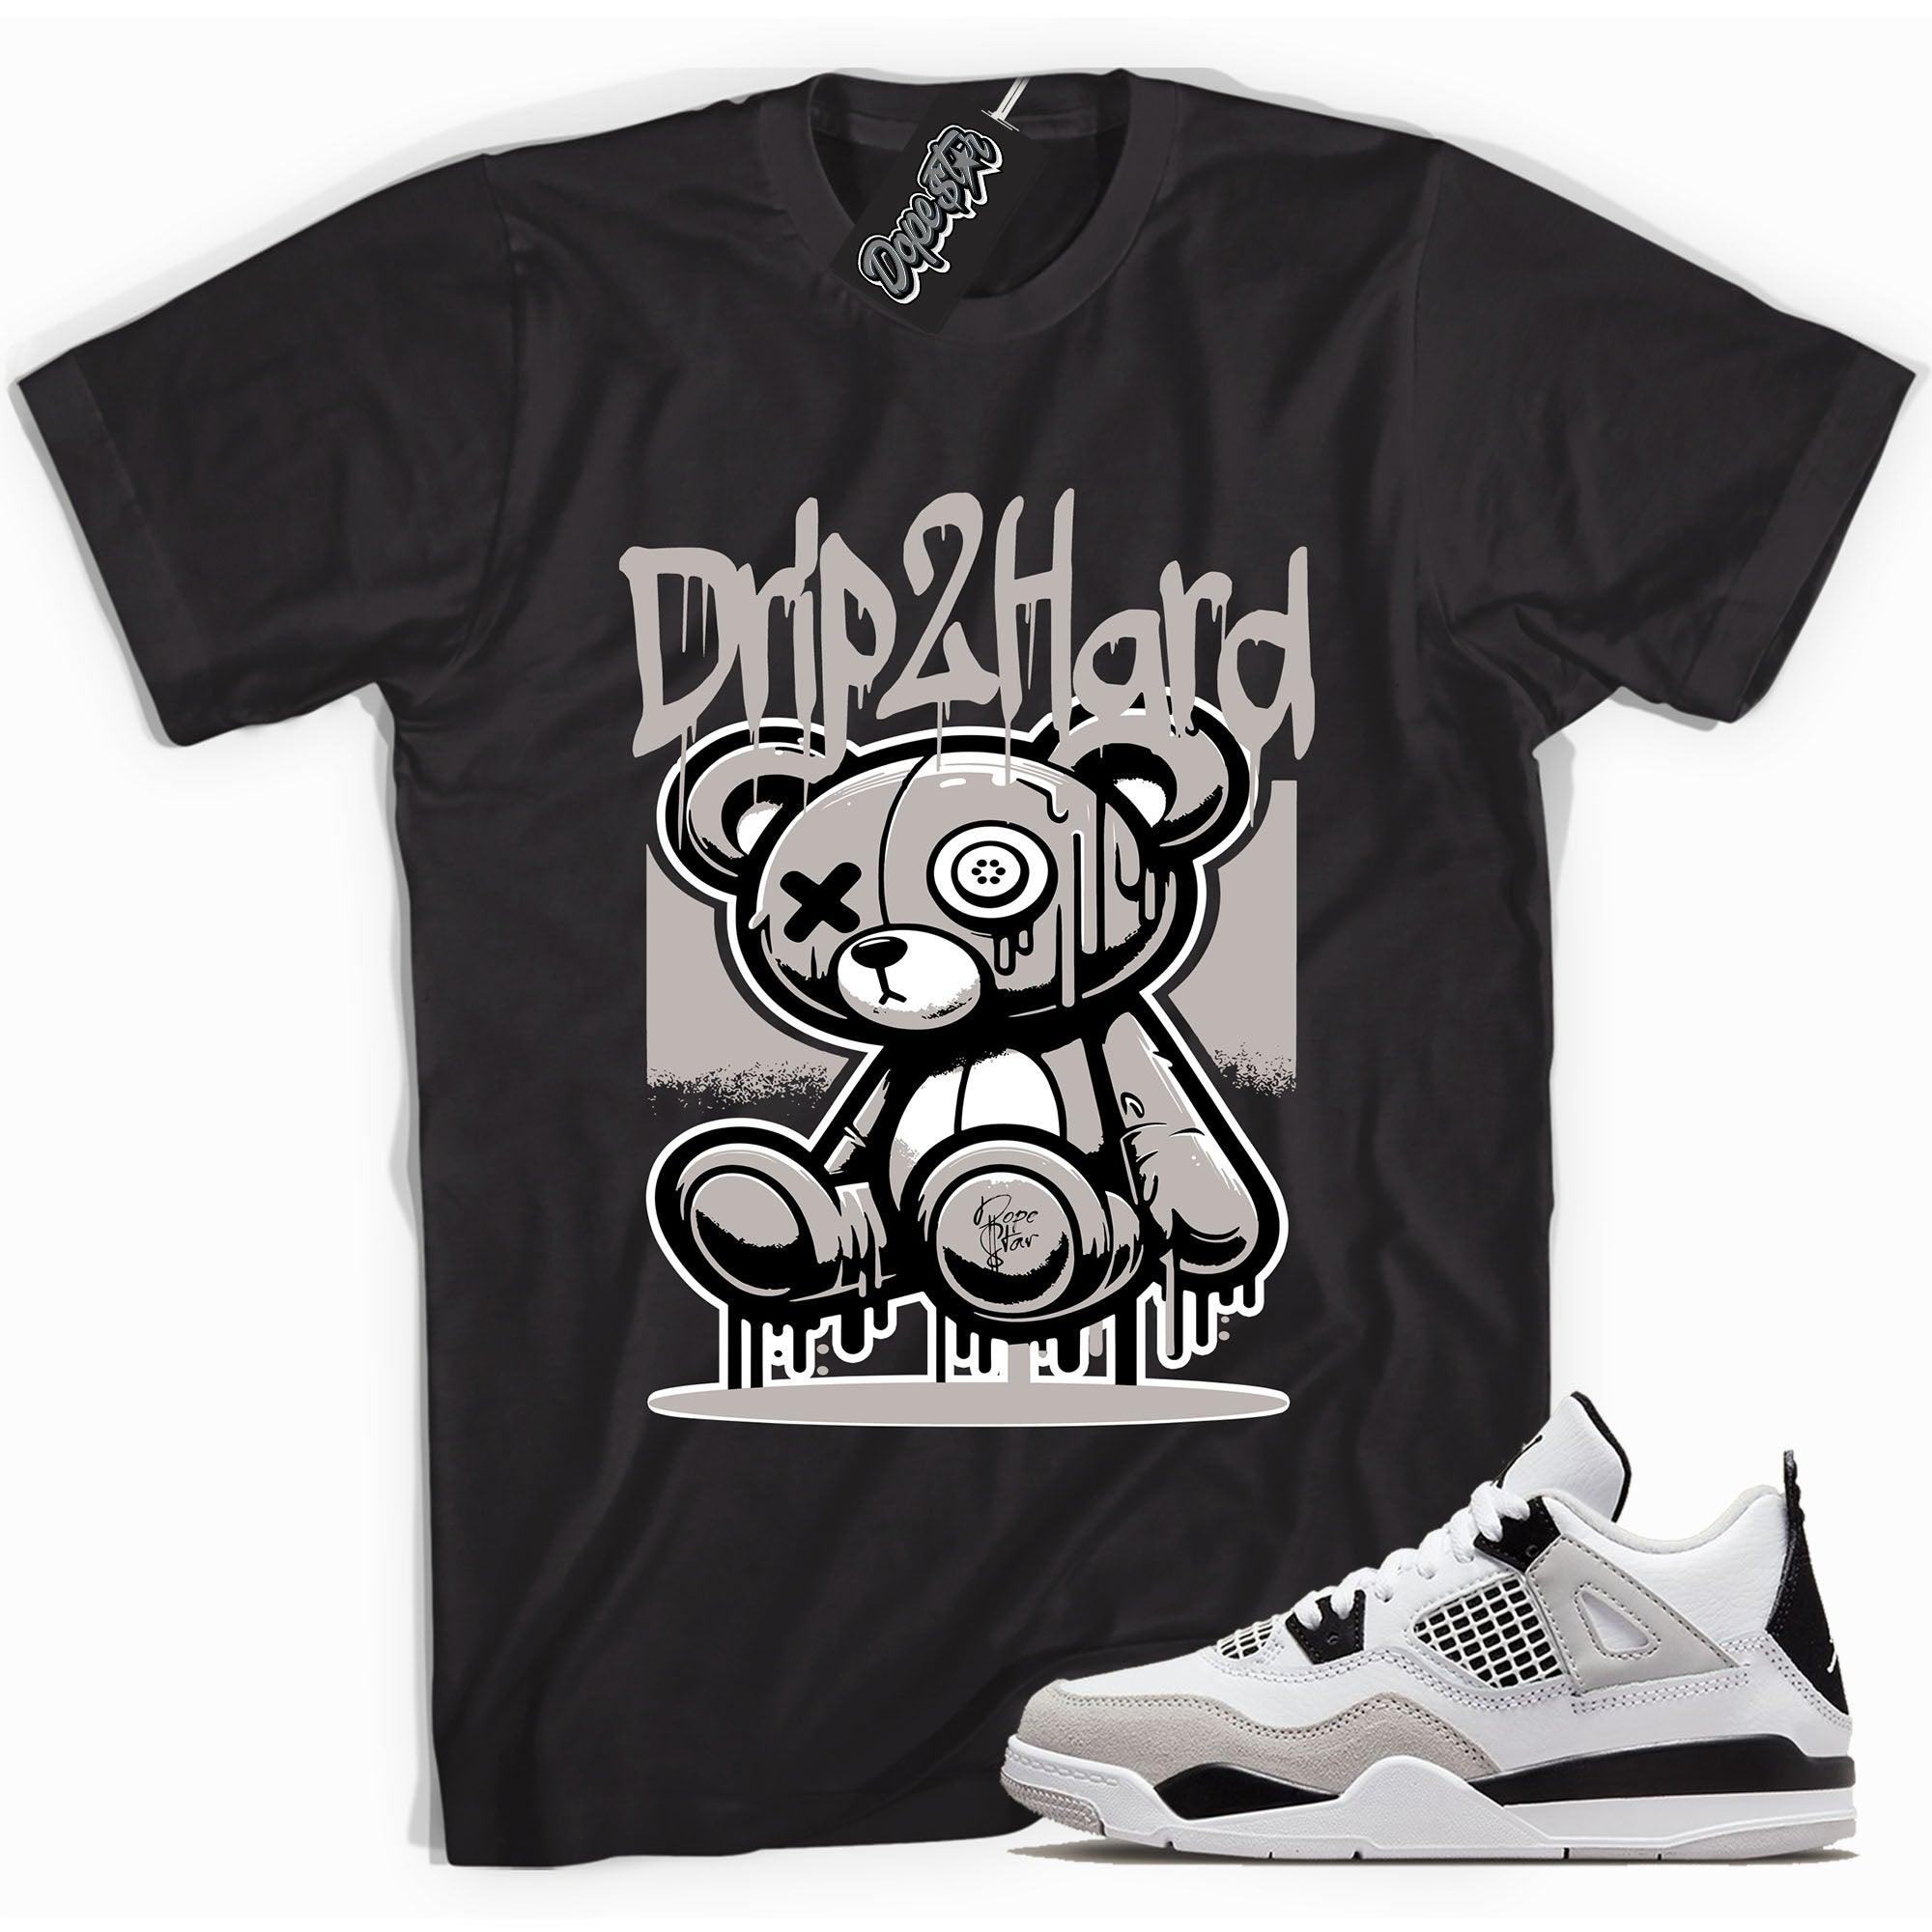 Cool Black Shirt With Drip To Hard design That Perfectly Matches AIR JORDAN 4 RETRO MILITARY BLACK Sneakers.